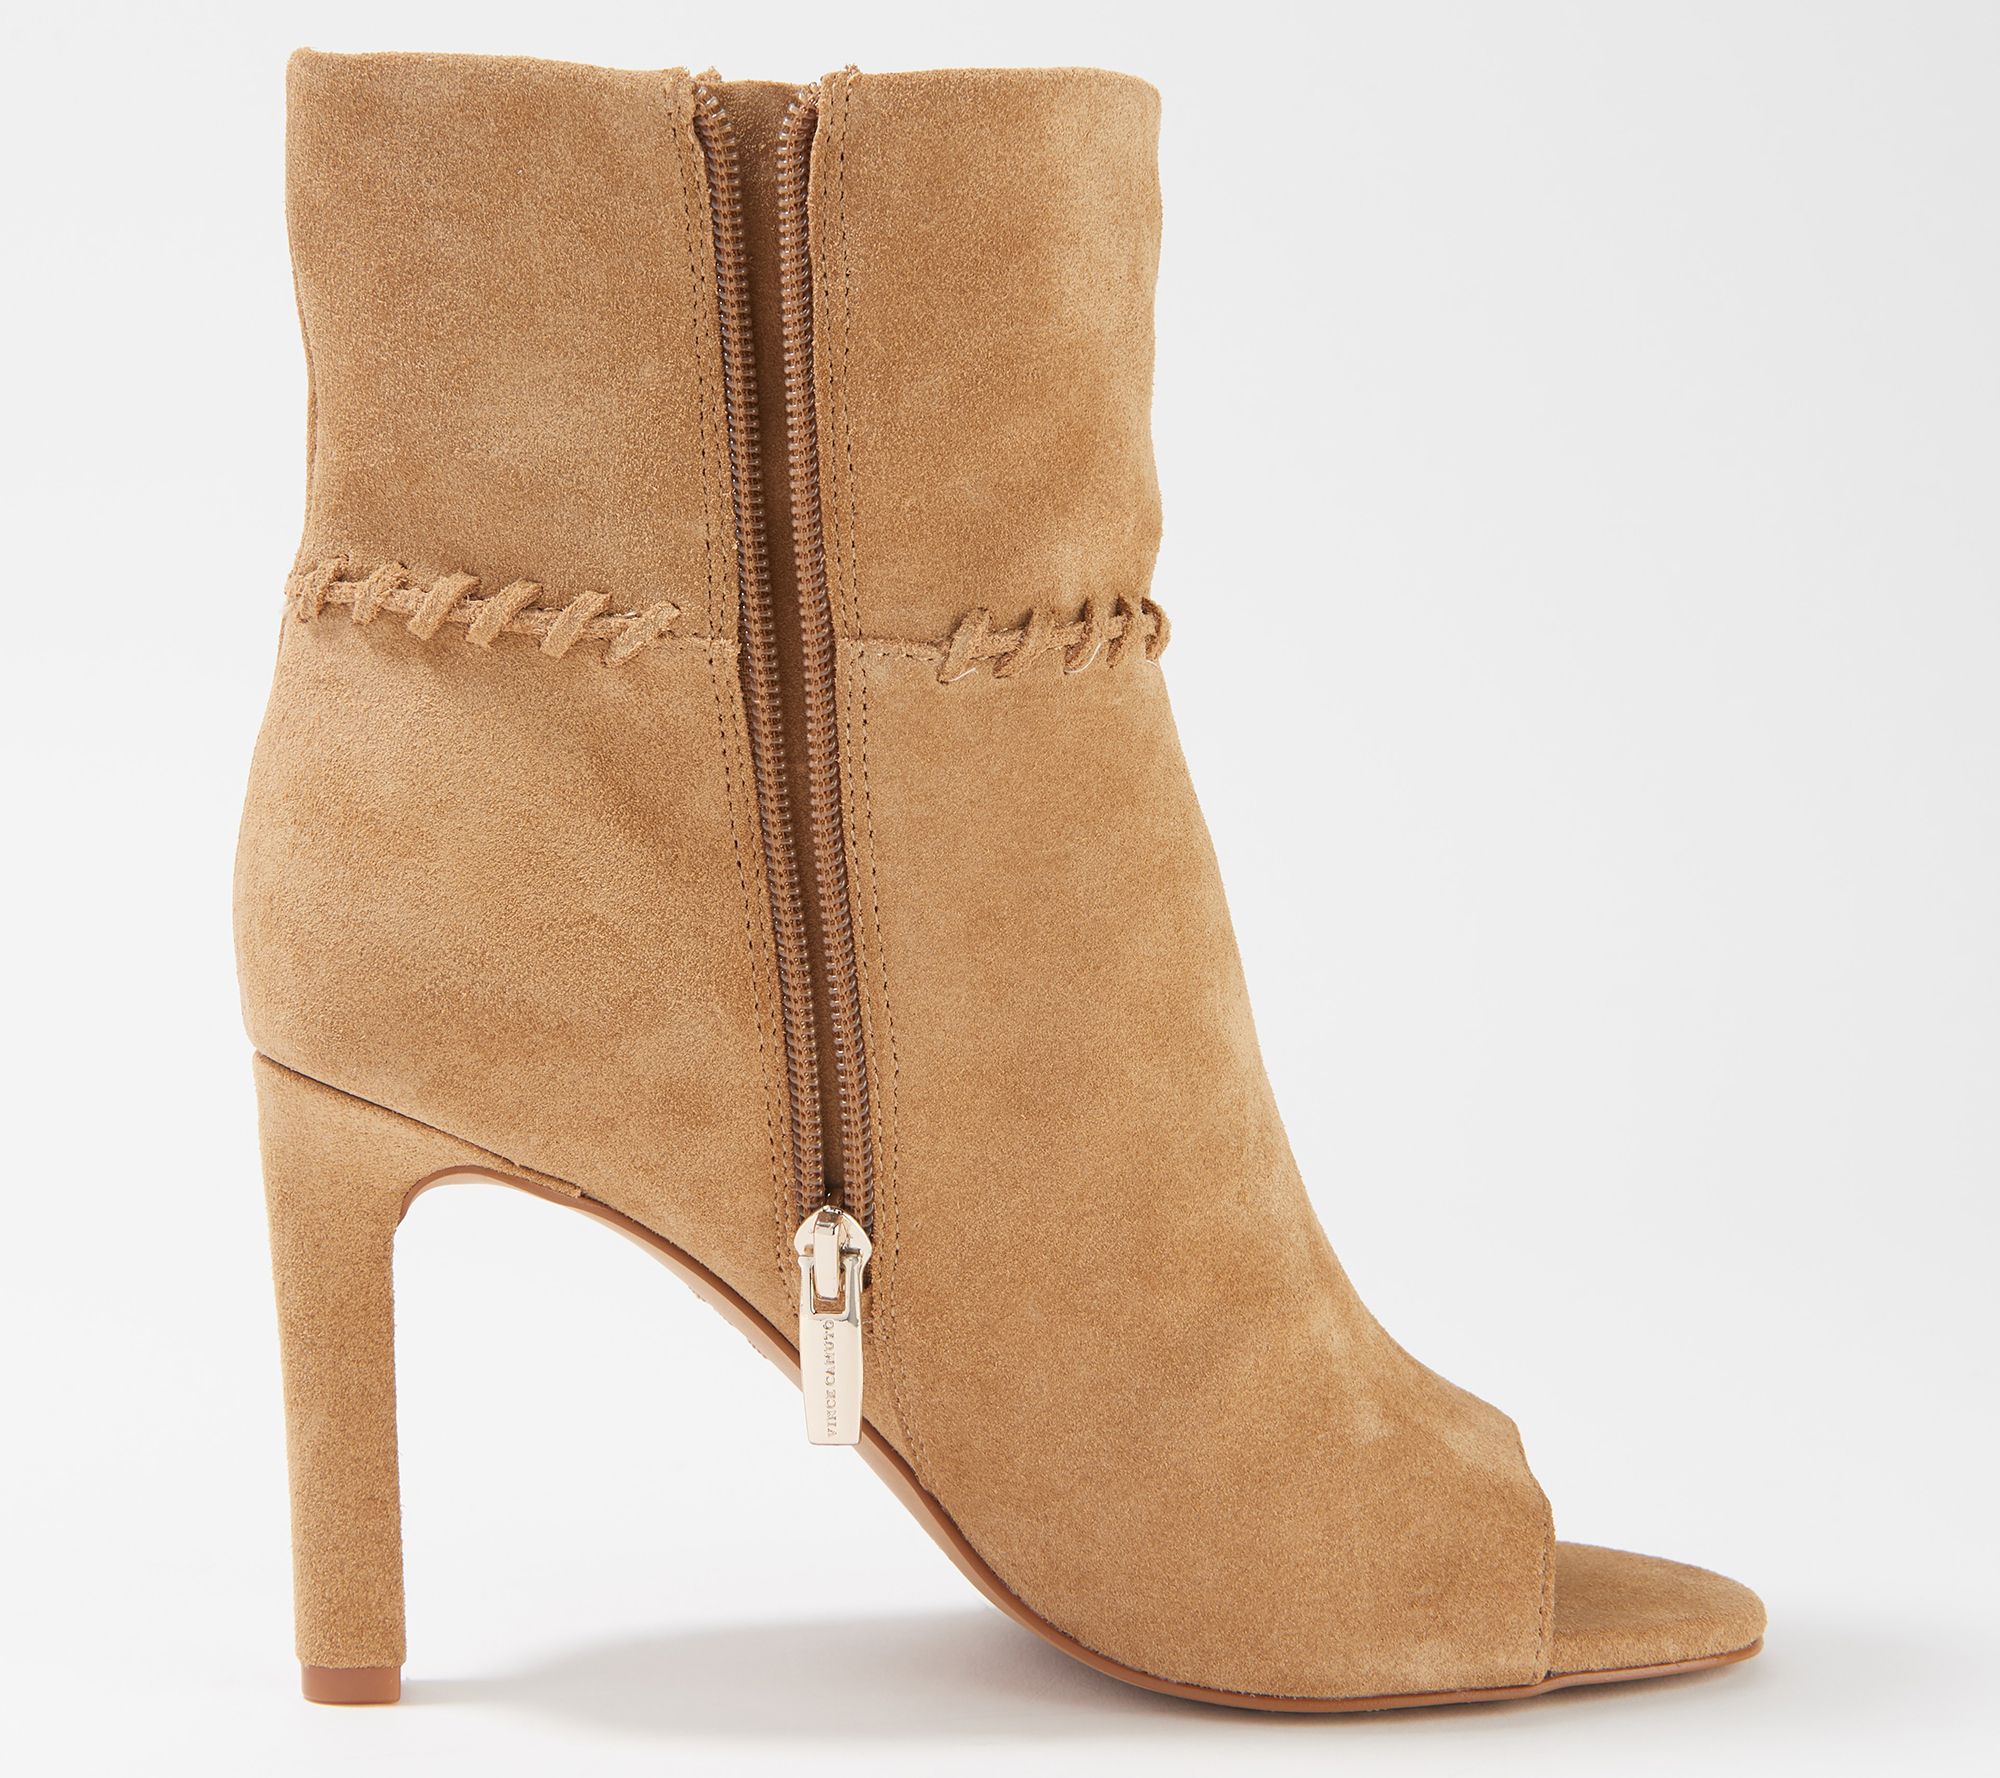 vince-camuto-suede-peep-toe-ankle-booties-sashane-qvc